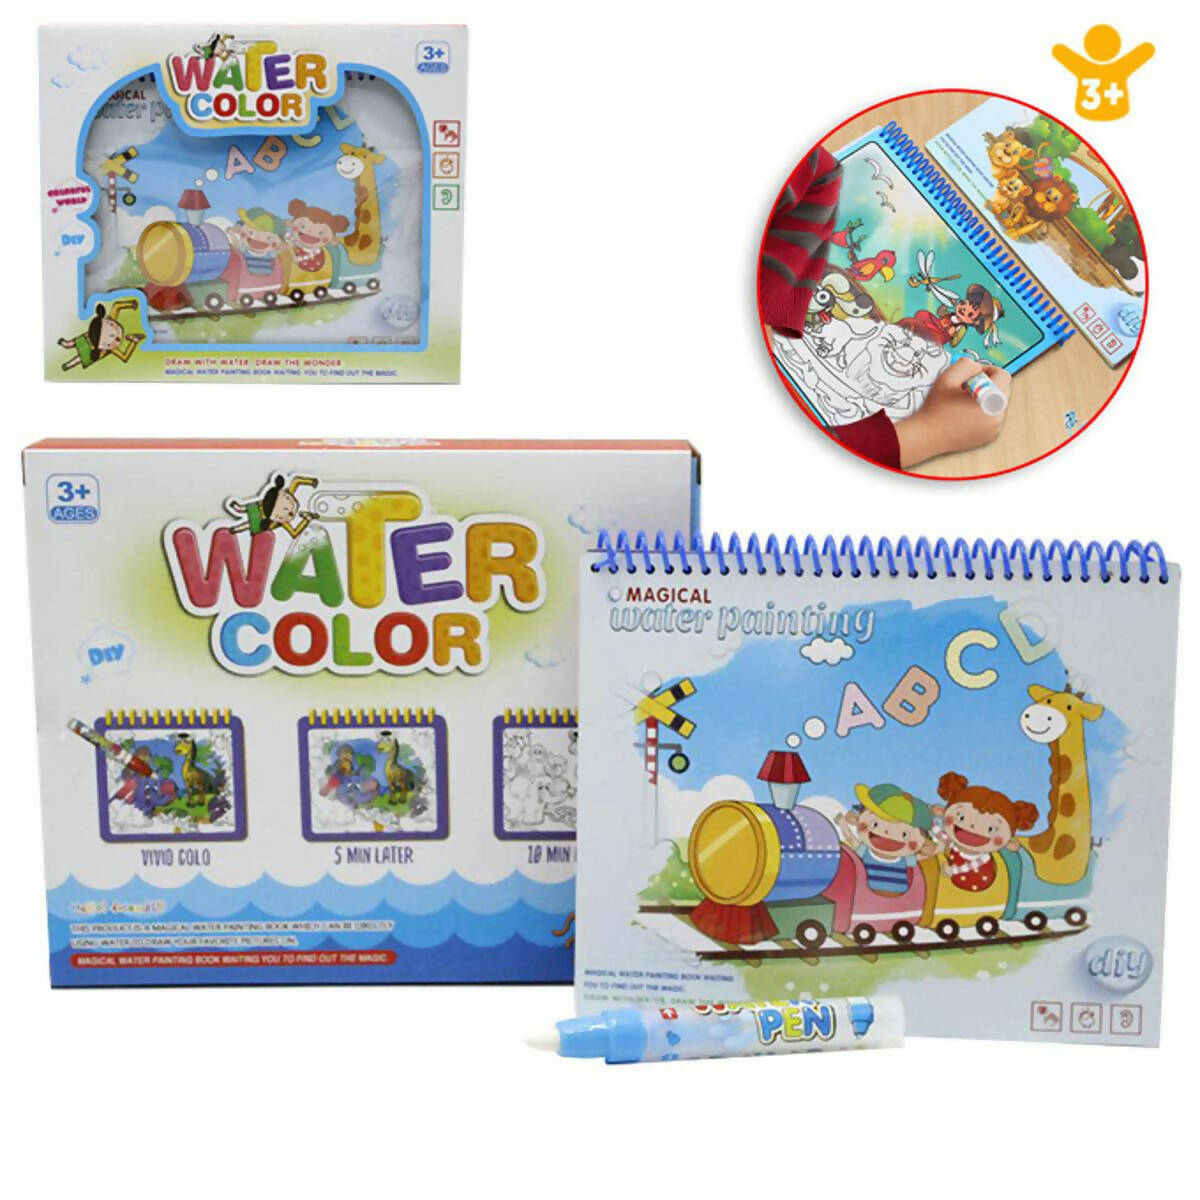 Magical Water Color Painting Book Letters for Kids Educational Learning Toy